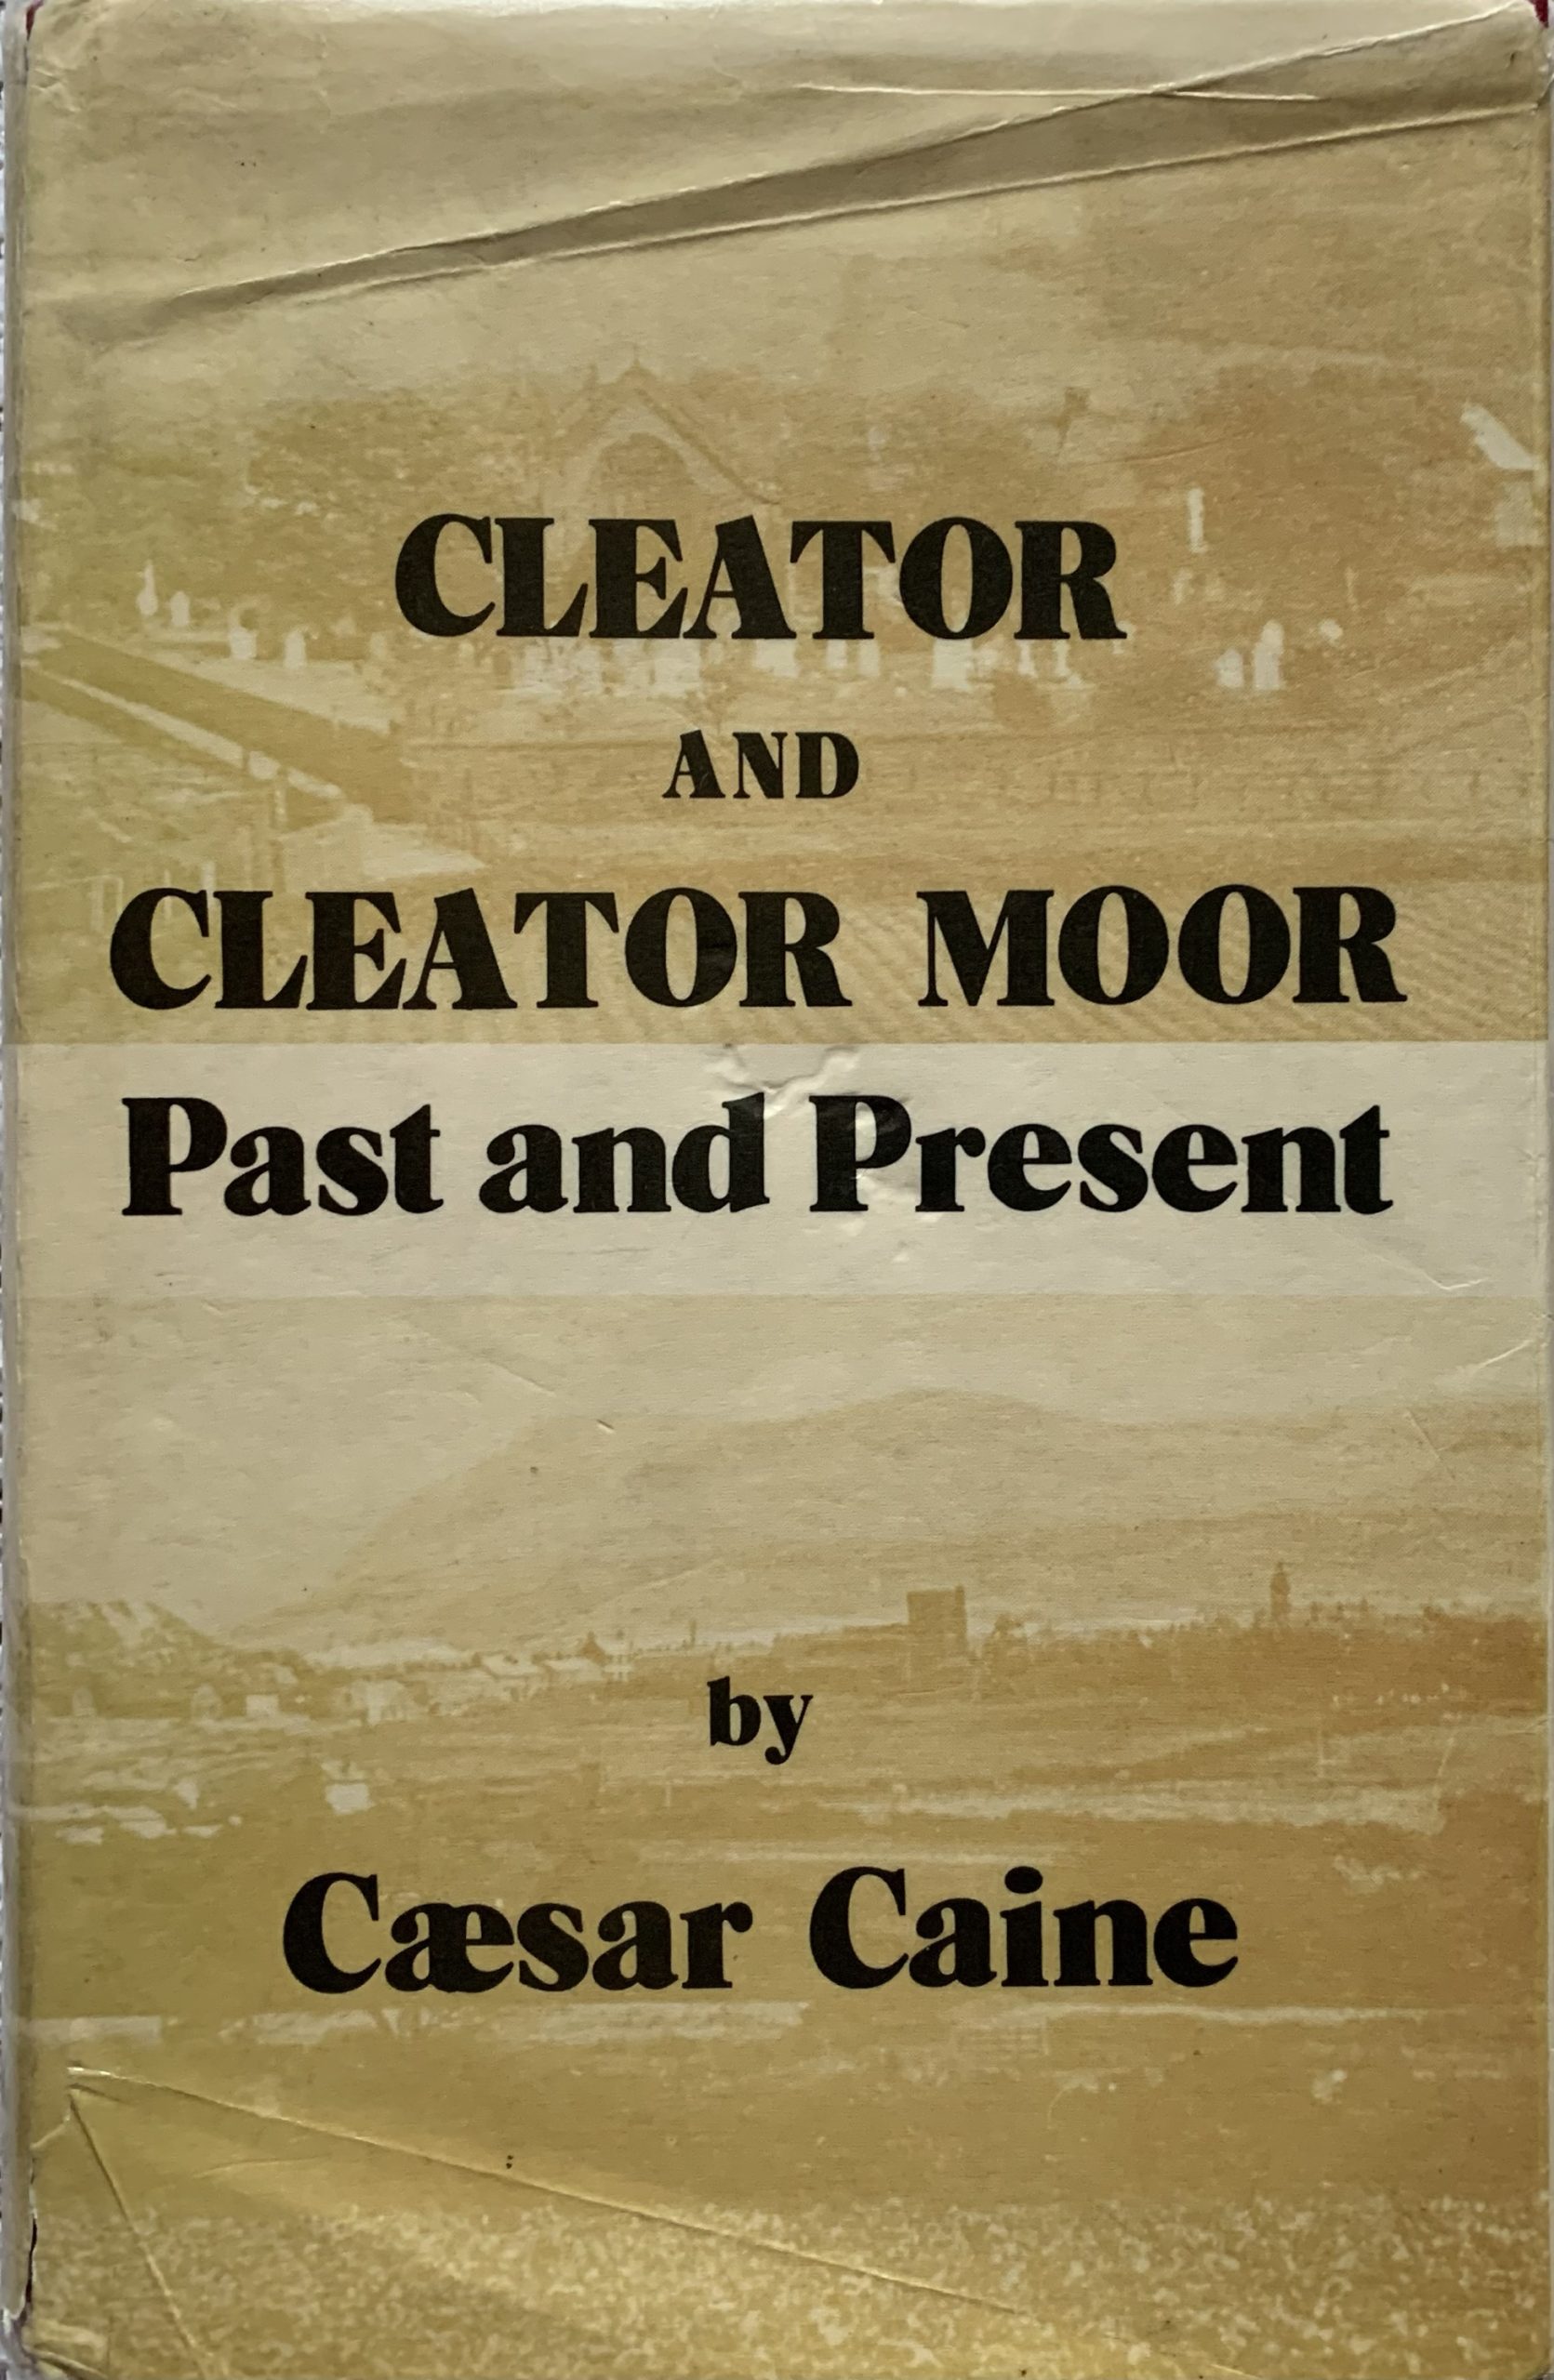 Cleator and Cleator Moor: Past and Present by Caesar Caine